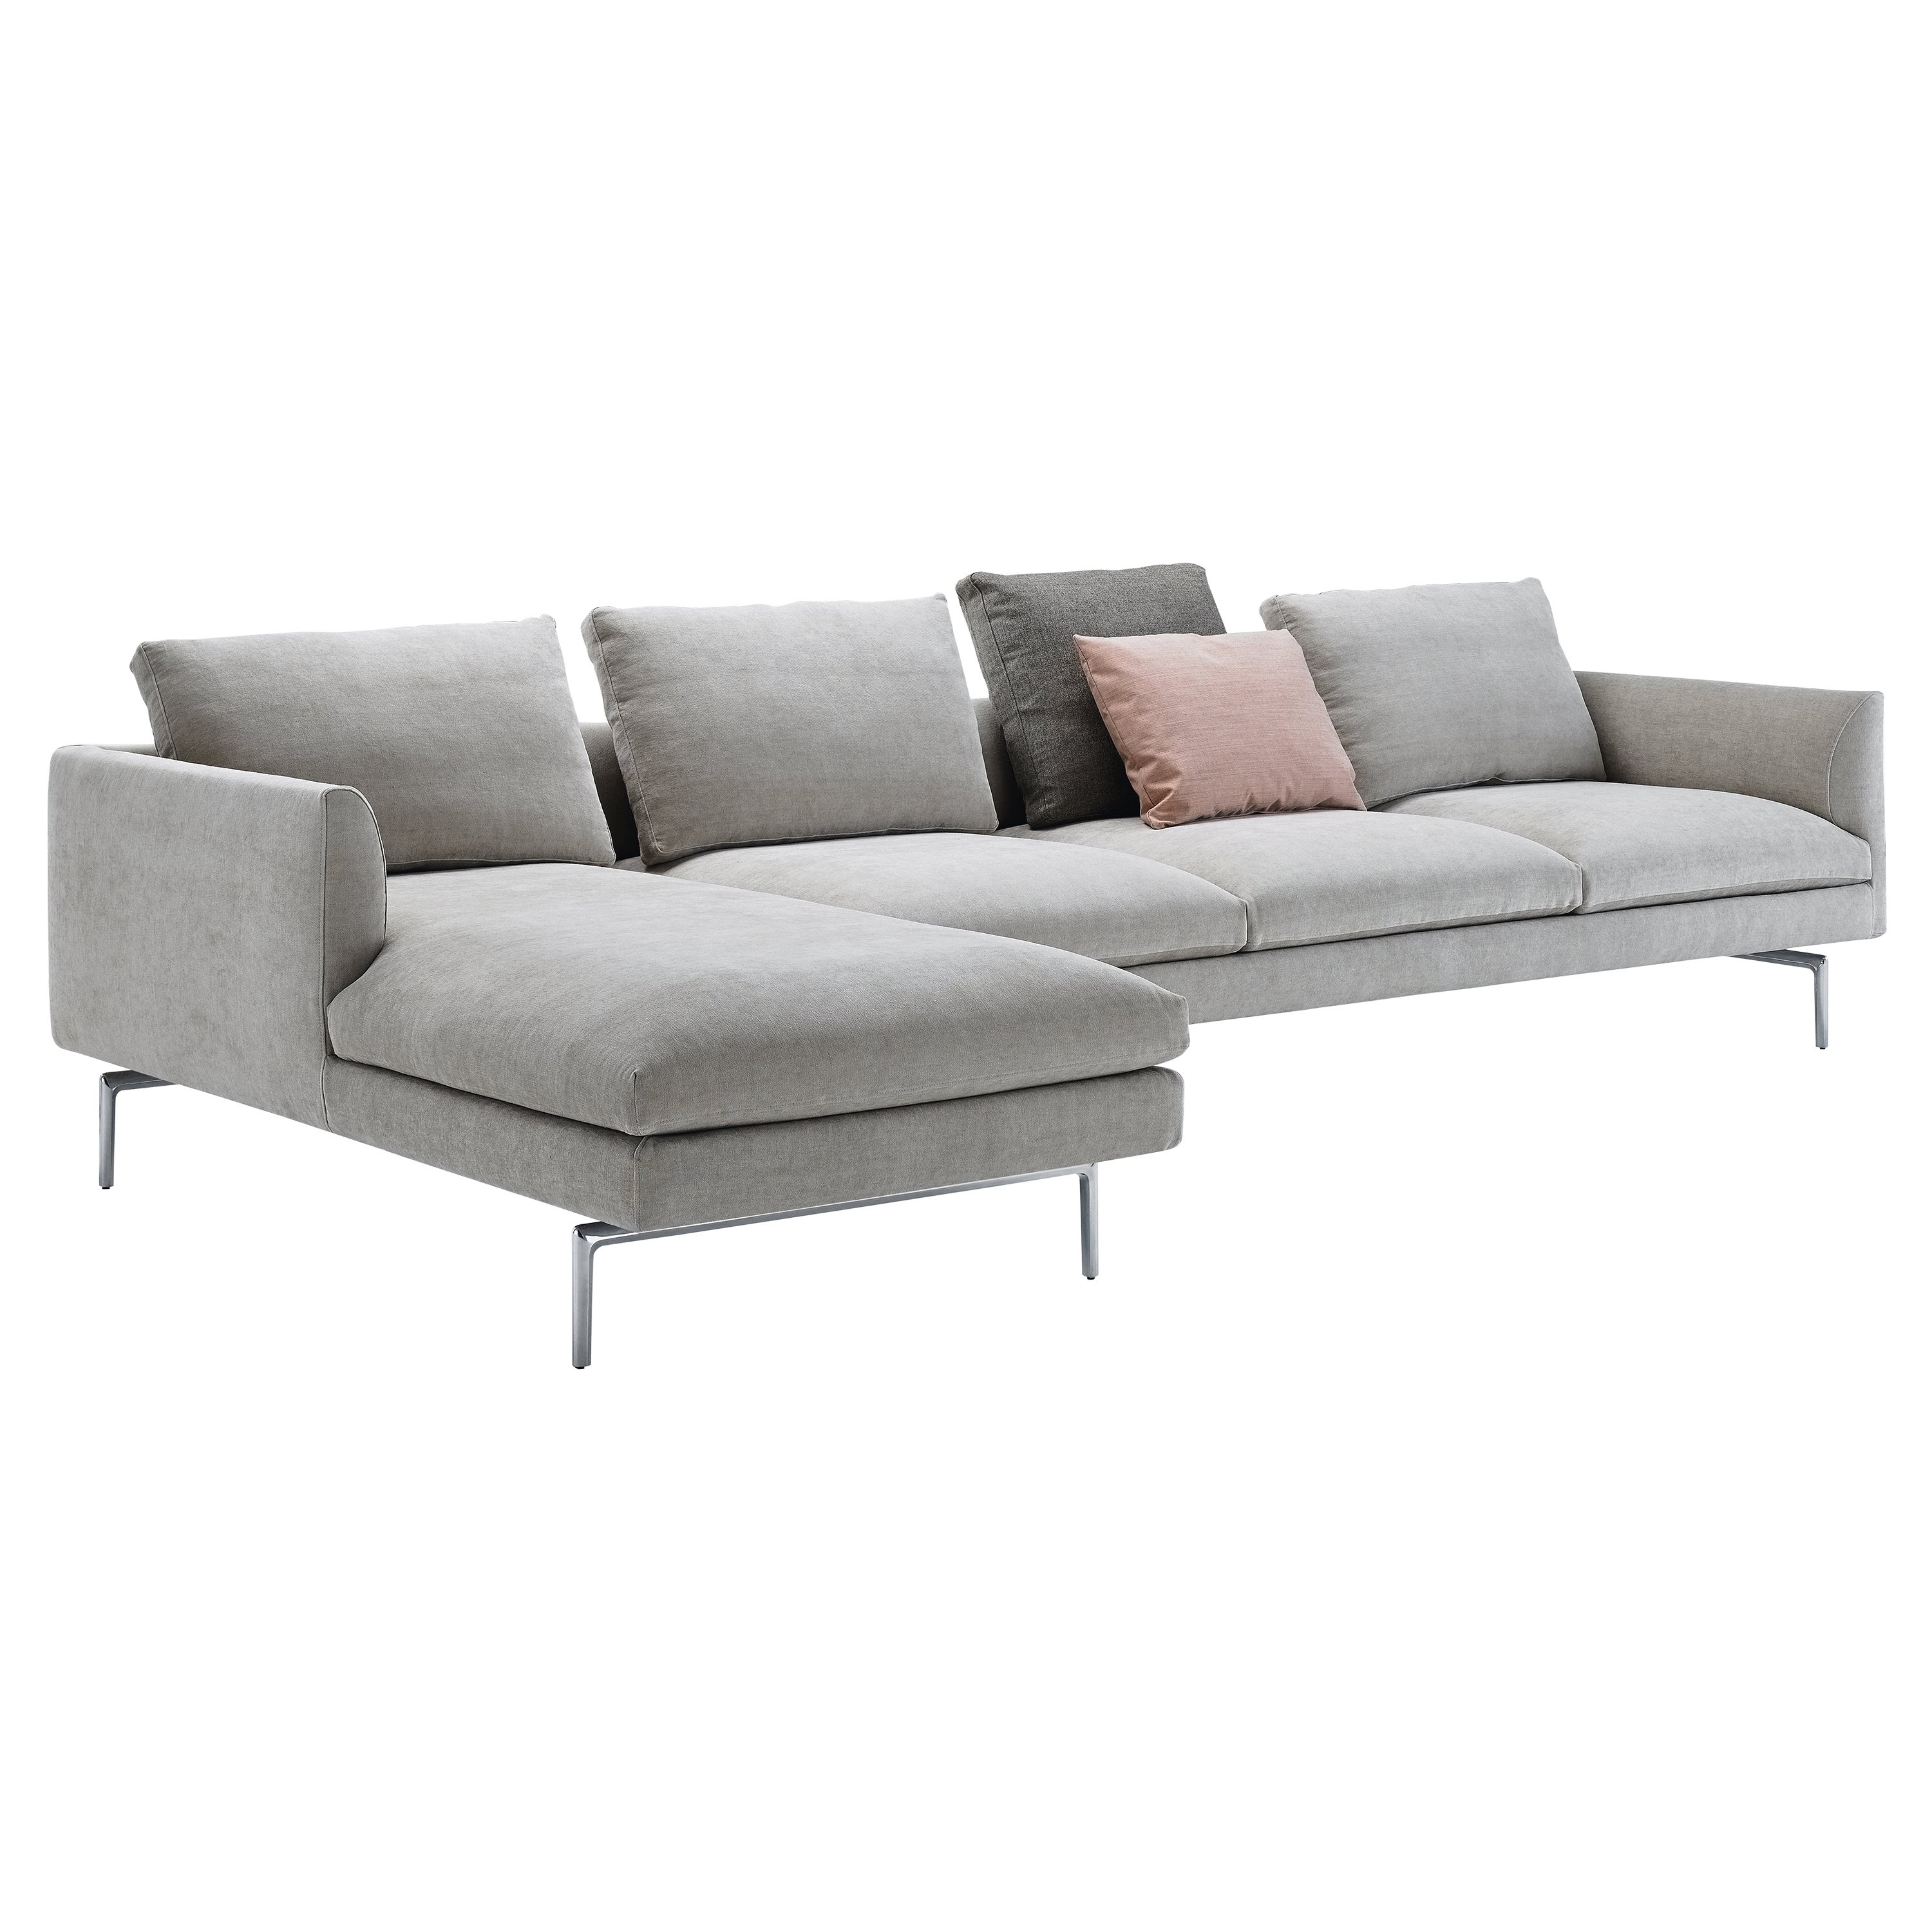 Zanotta Flamingo Sectional Sofa in Vale Upholstery with Polished Aluminum Frame For Sale